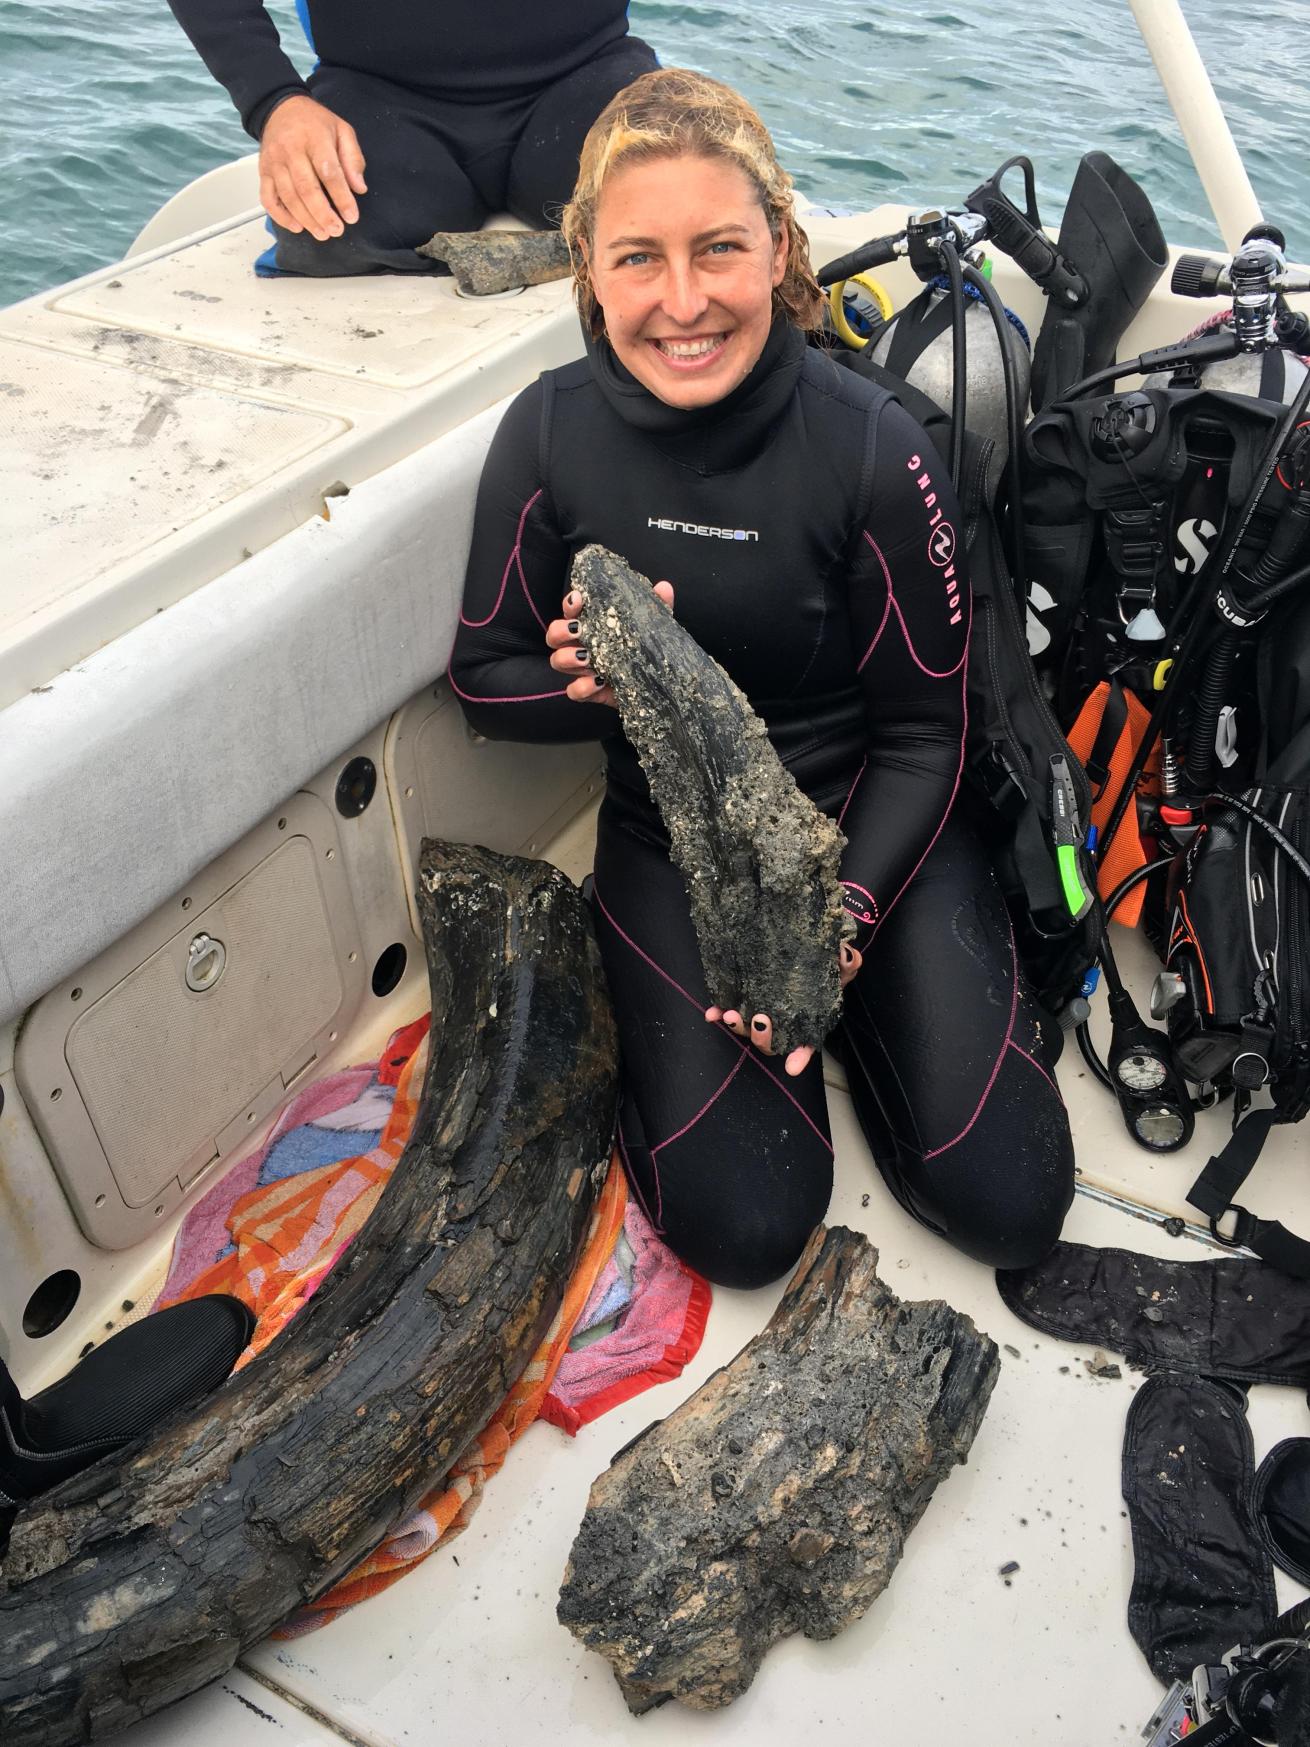 Diver poses with mammoth tusk discovered in Gulf of Mexico